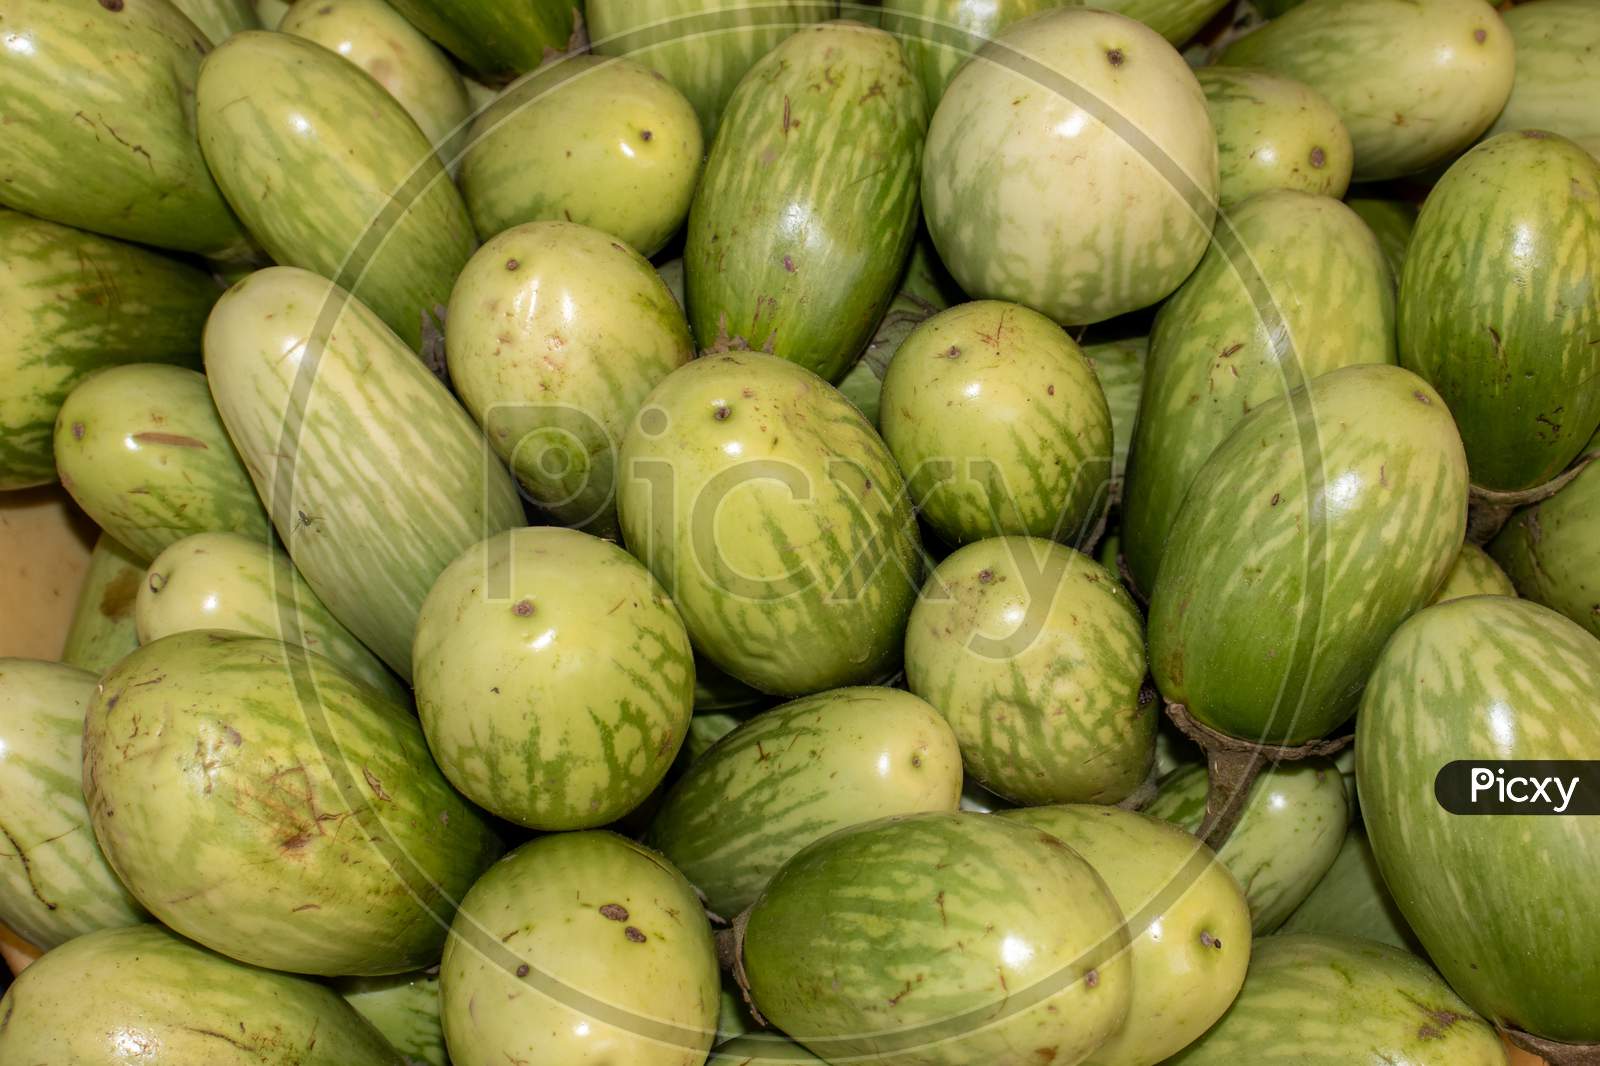 Organic Eggplant In An Indian Vegetable Market For Selling